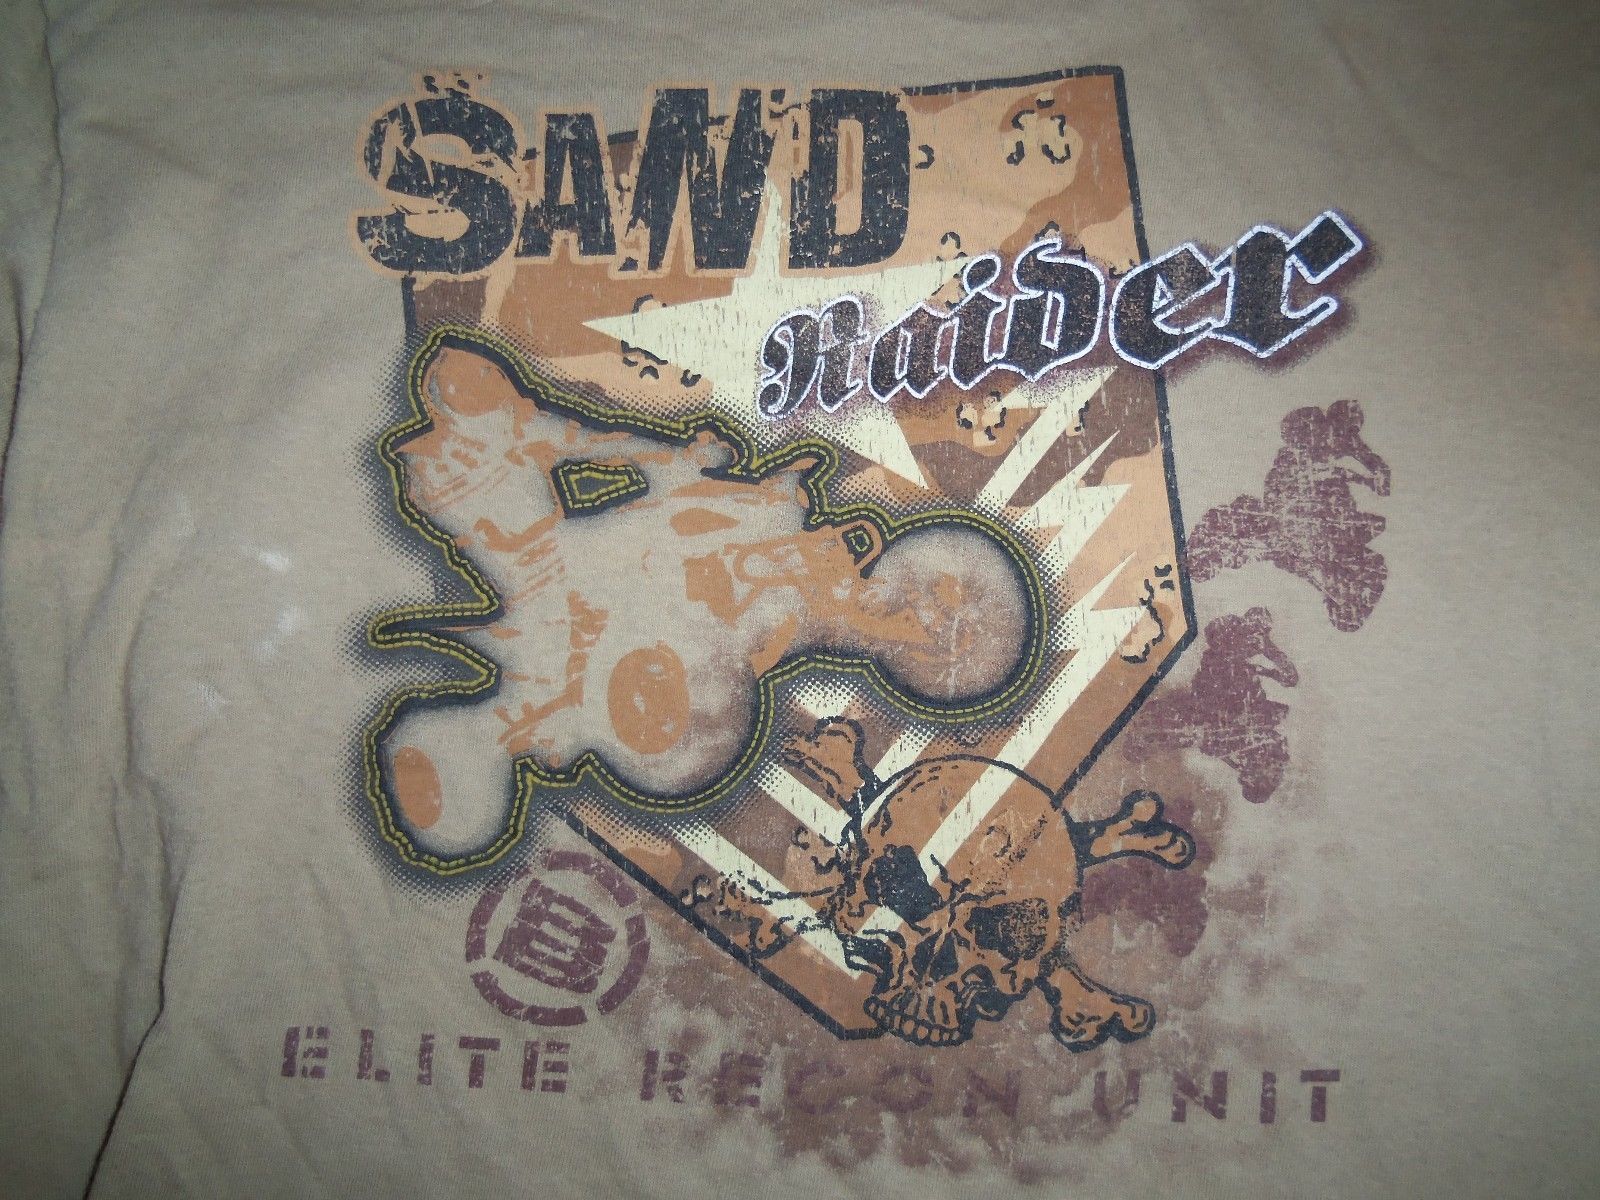 Primary image for Sand Raider Elite Recon Unit ATV Motorsport Brown Graphic Print T Shirt Youth XL